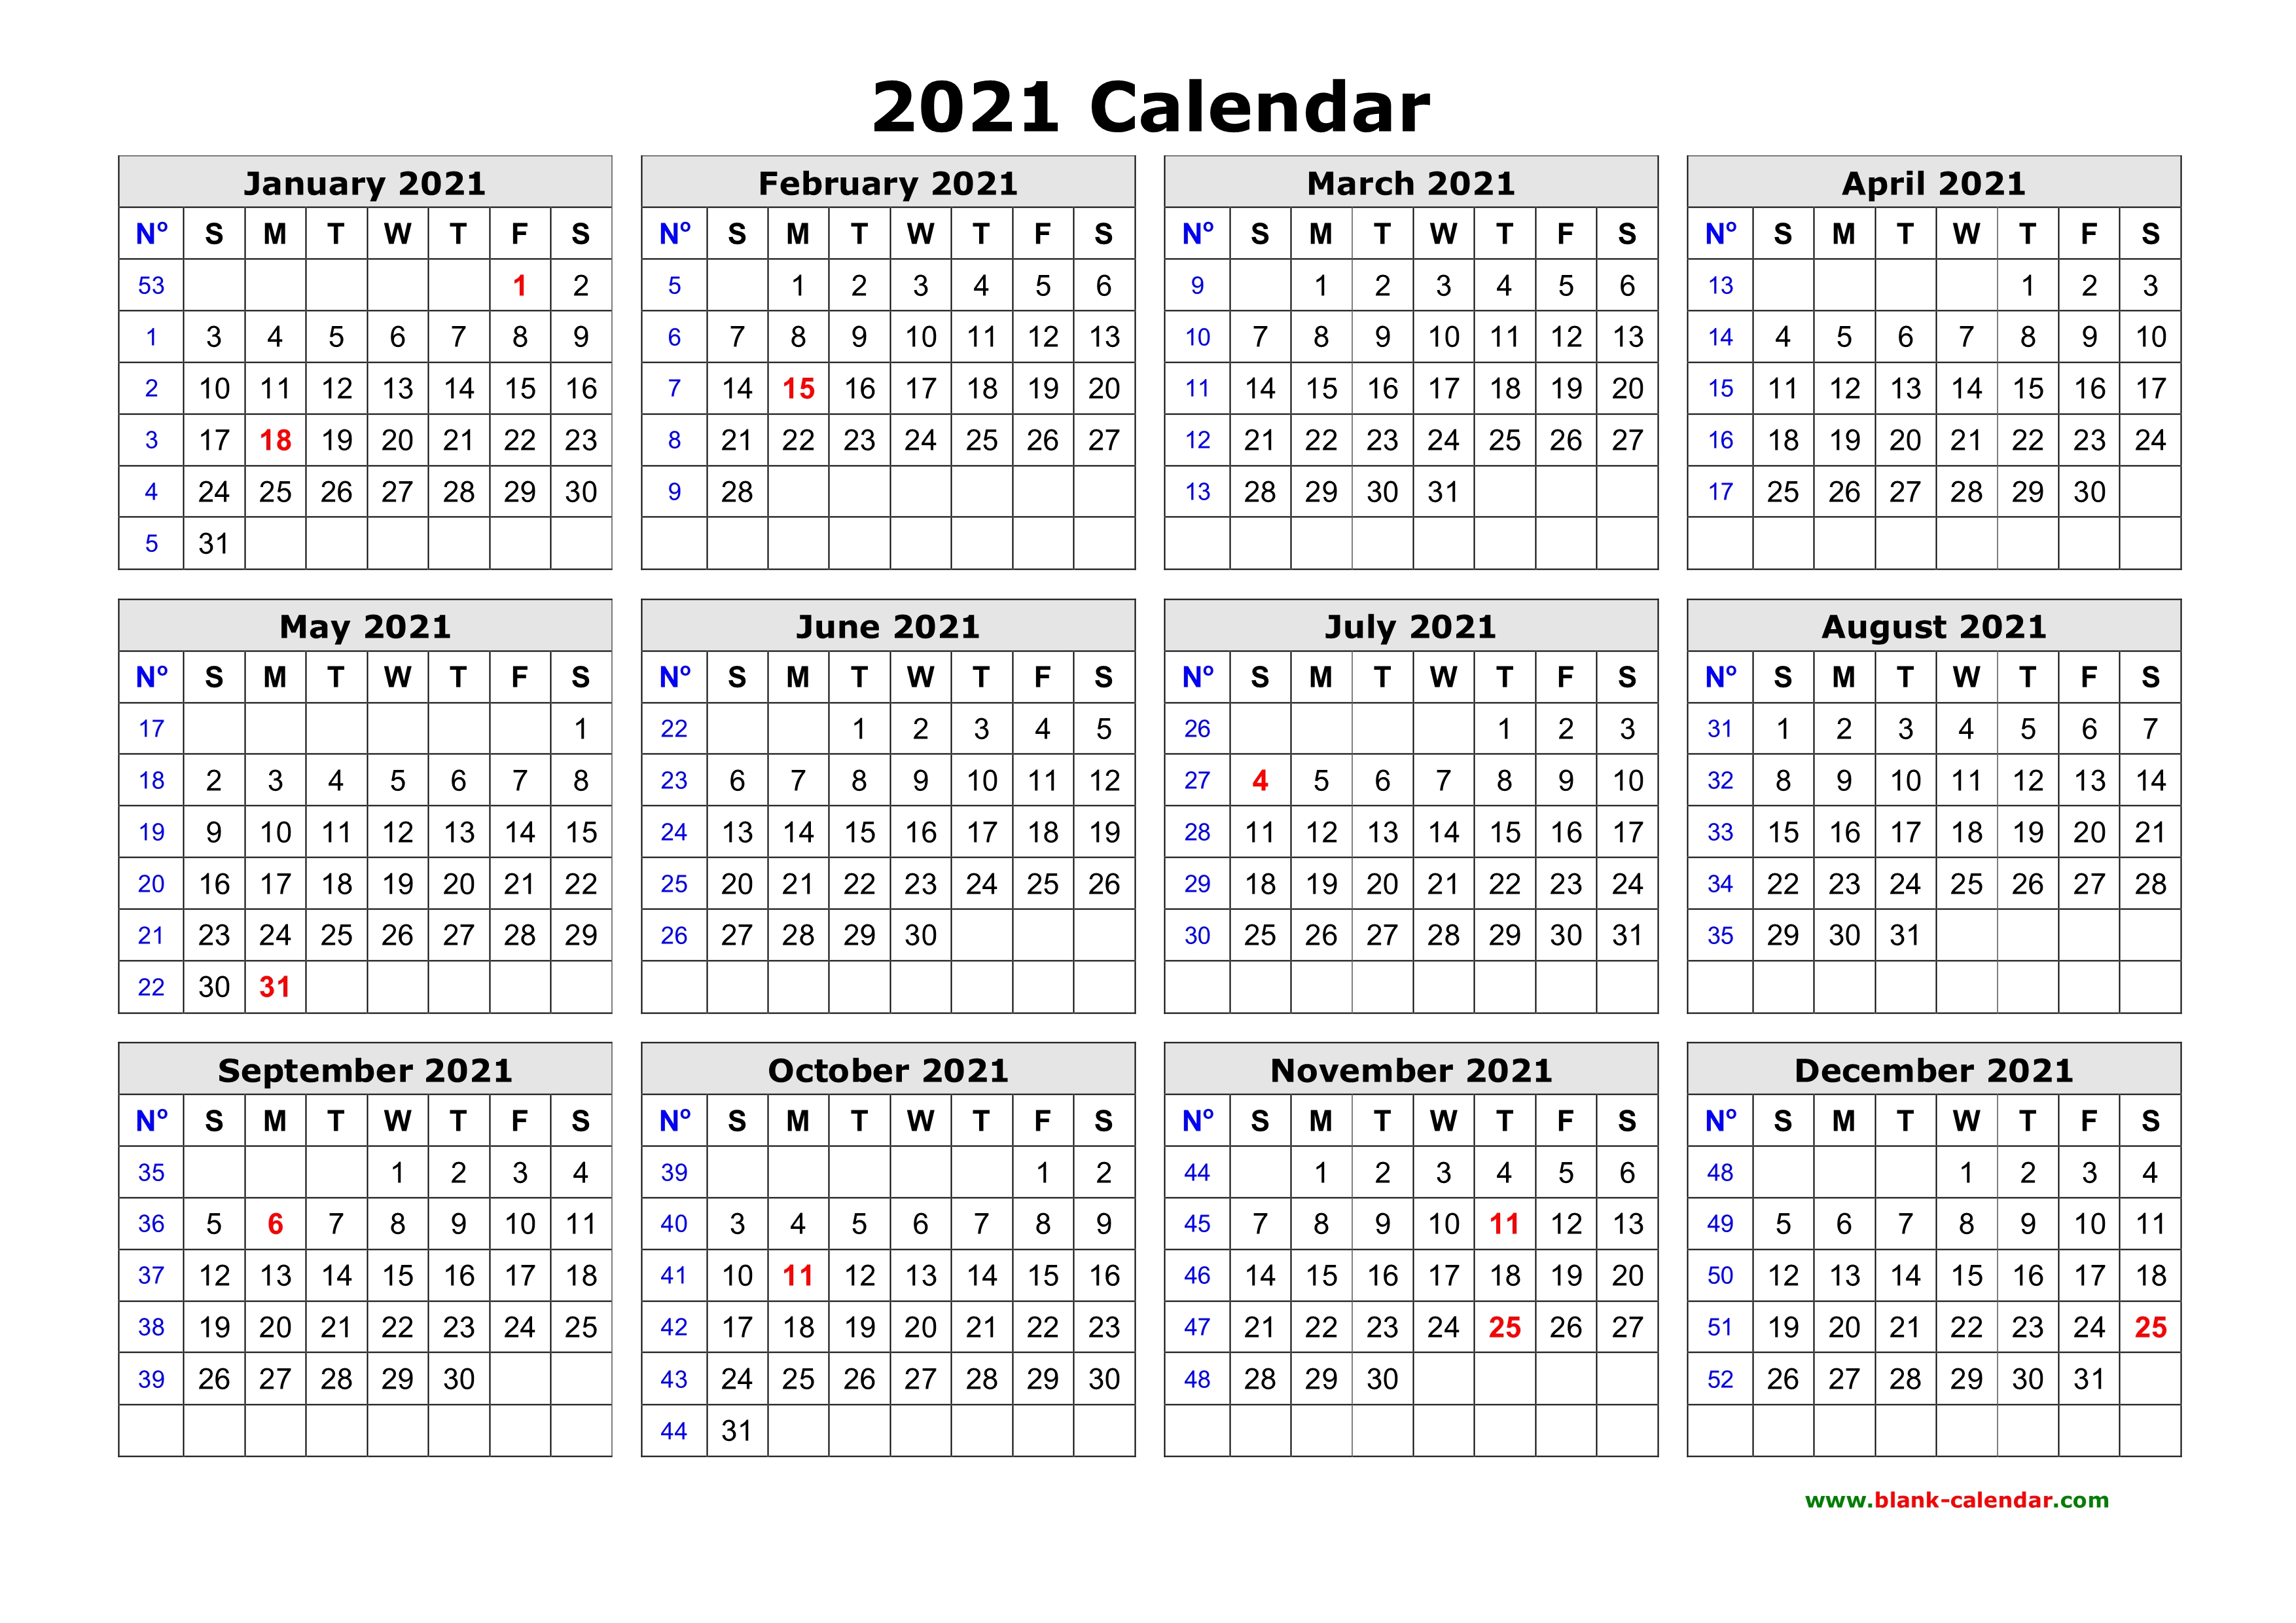 2021 Calendar One Page Free Download Printable Calendar 2021 in one page, clean design.